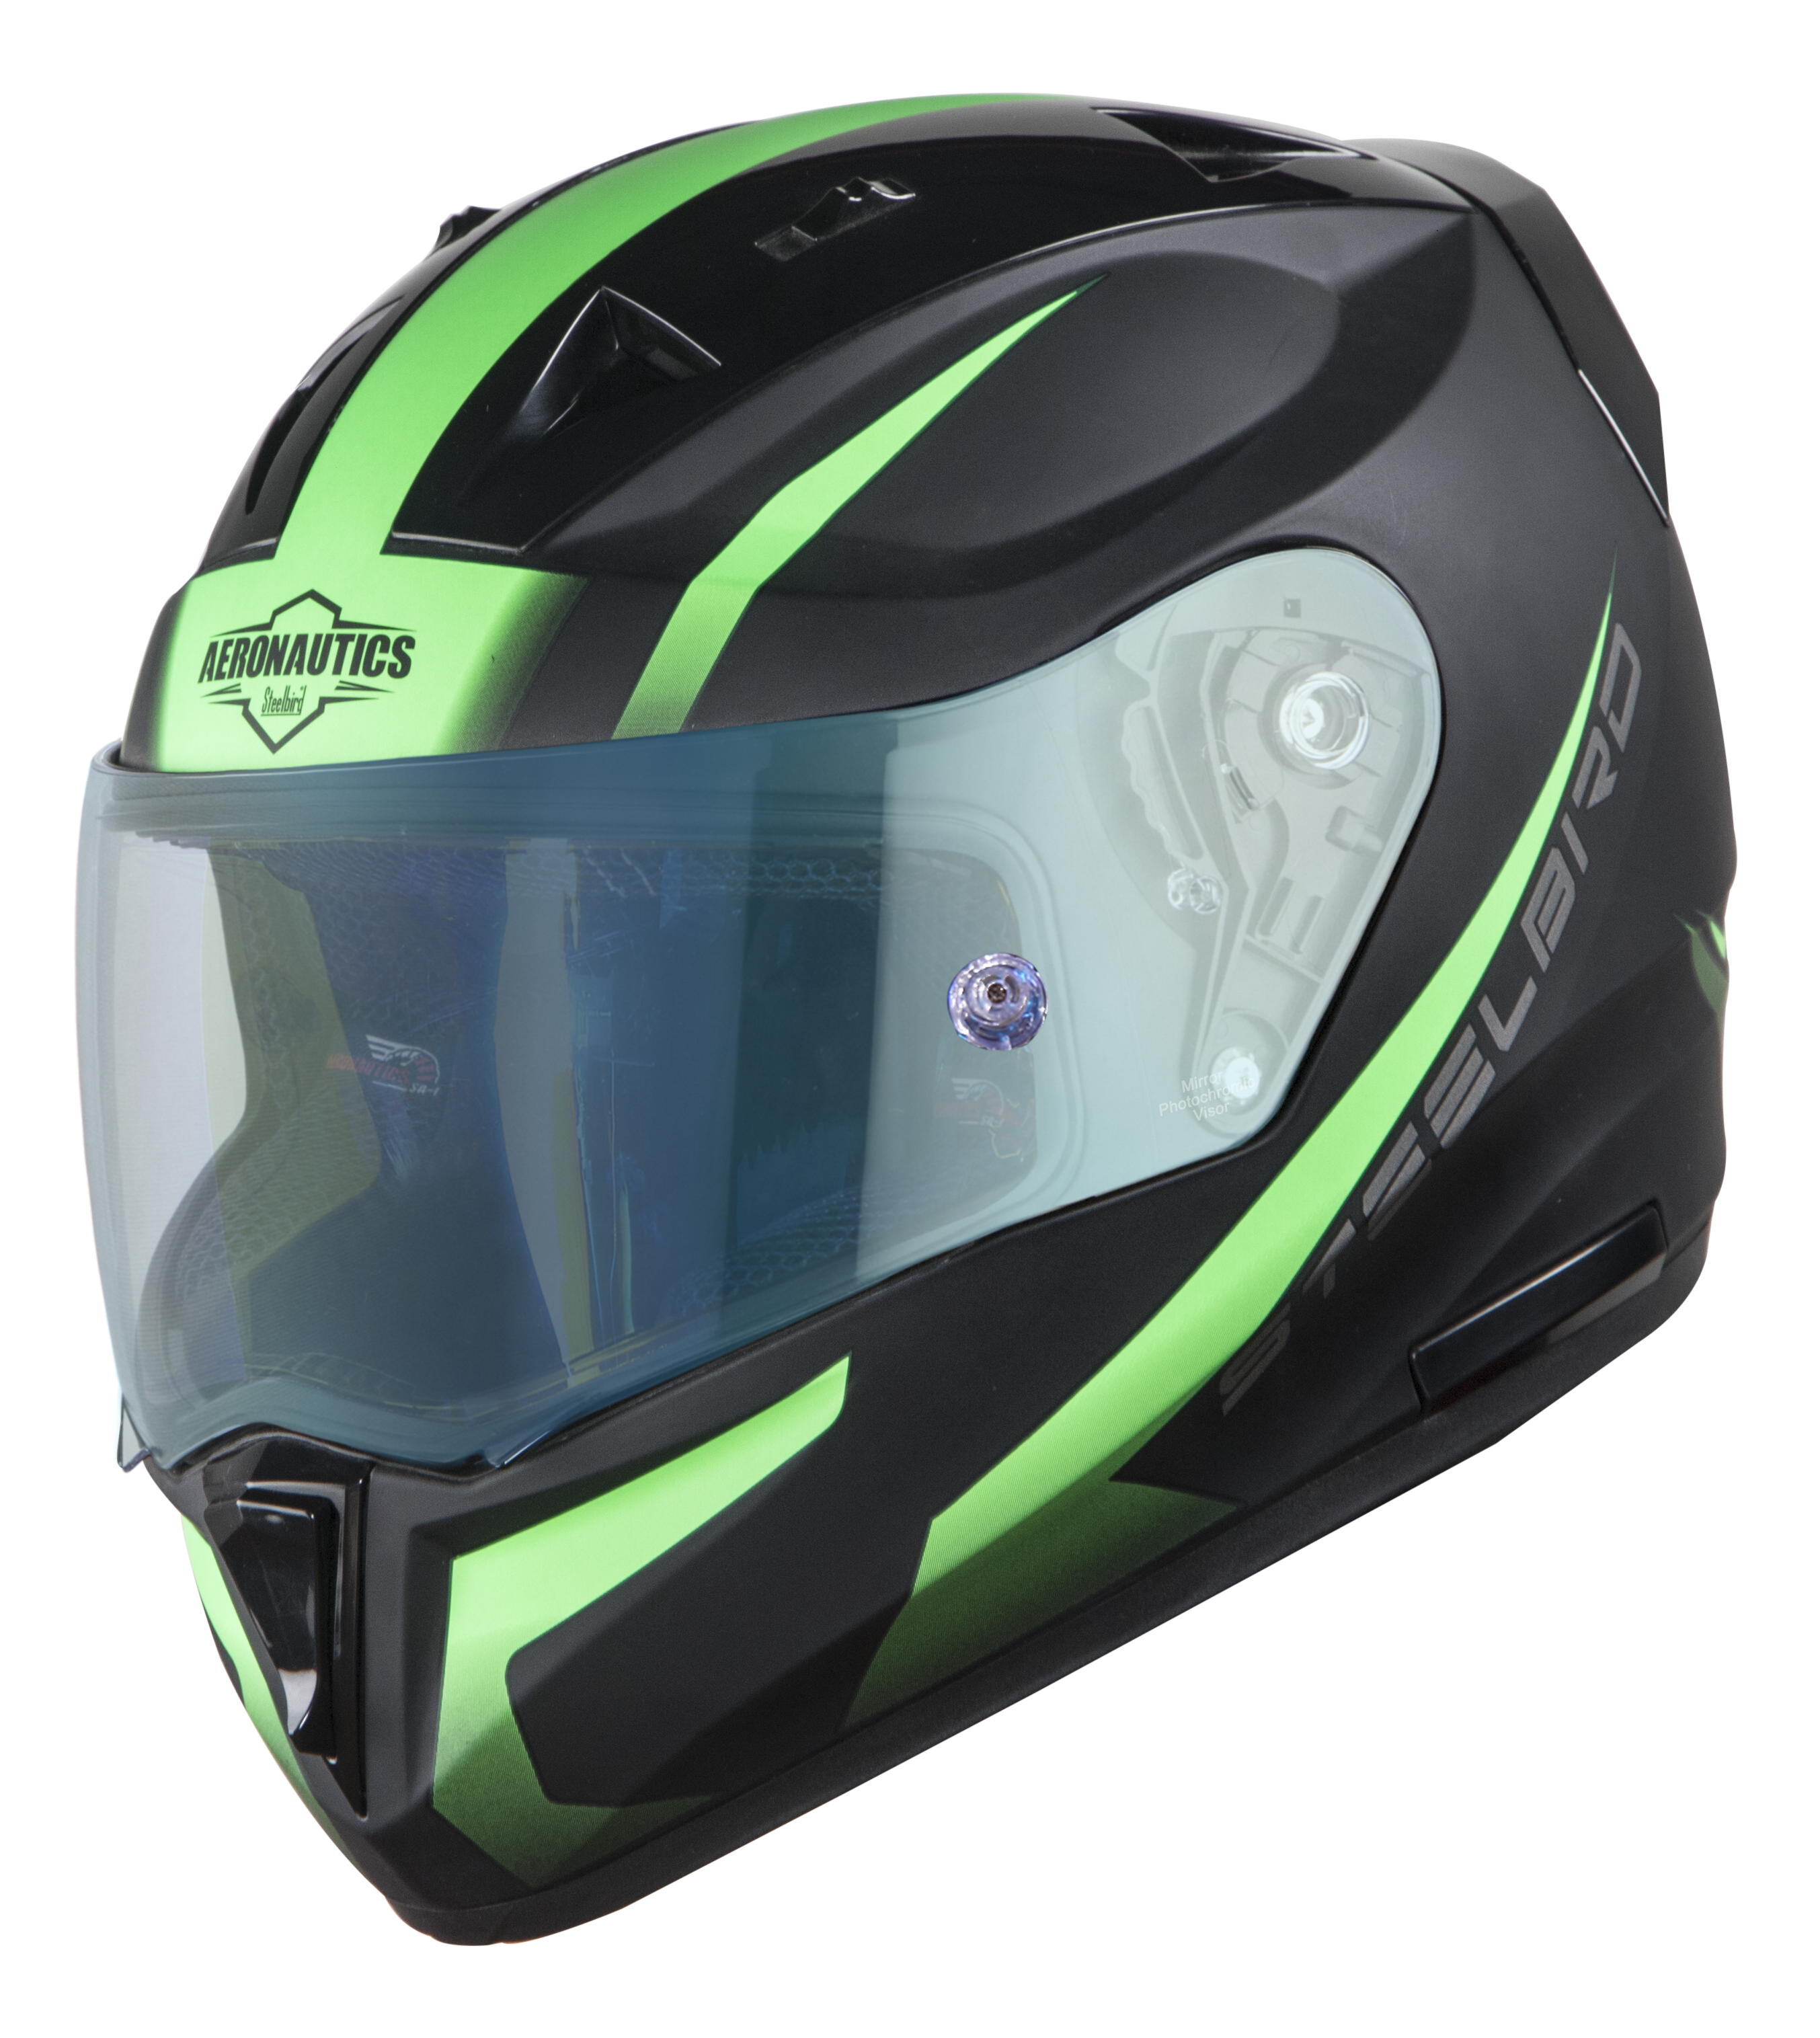 SA-1 WHIF Mat Black/Green (Fitted With Clear Visor Extra Anti-Fog Shield Blue Night Vision Photochromic Visor Free)